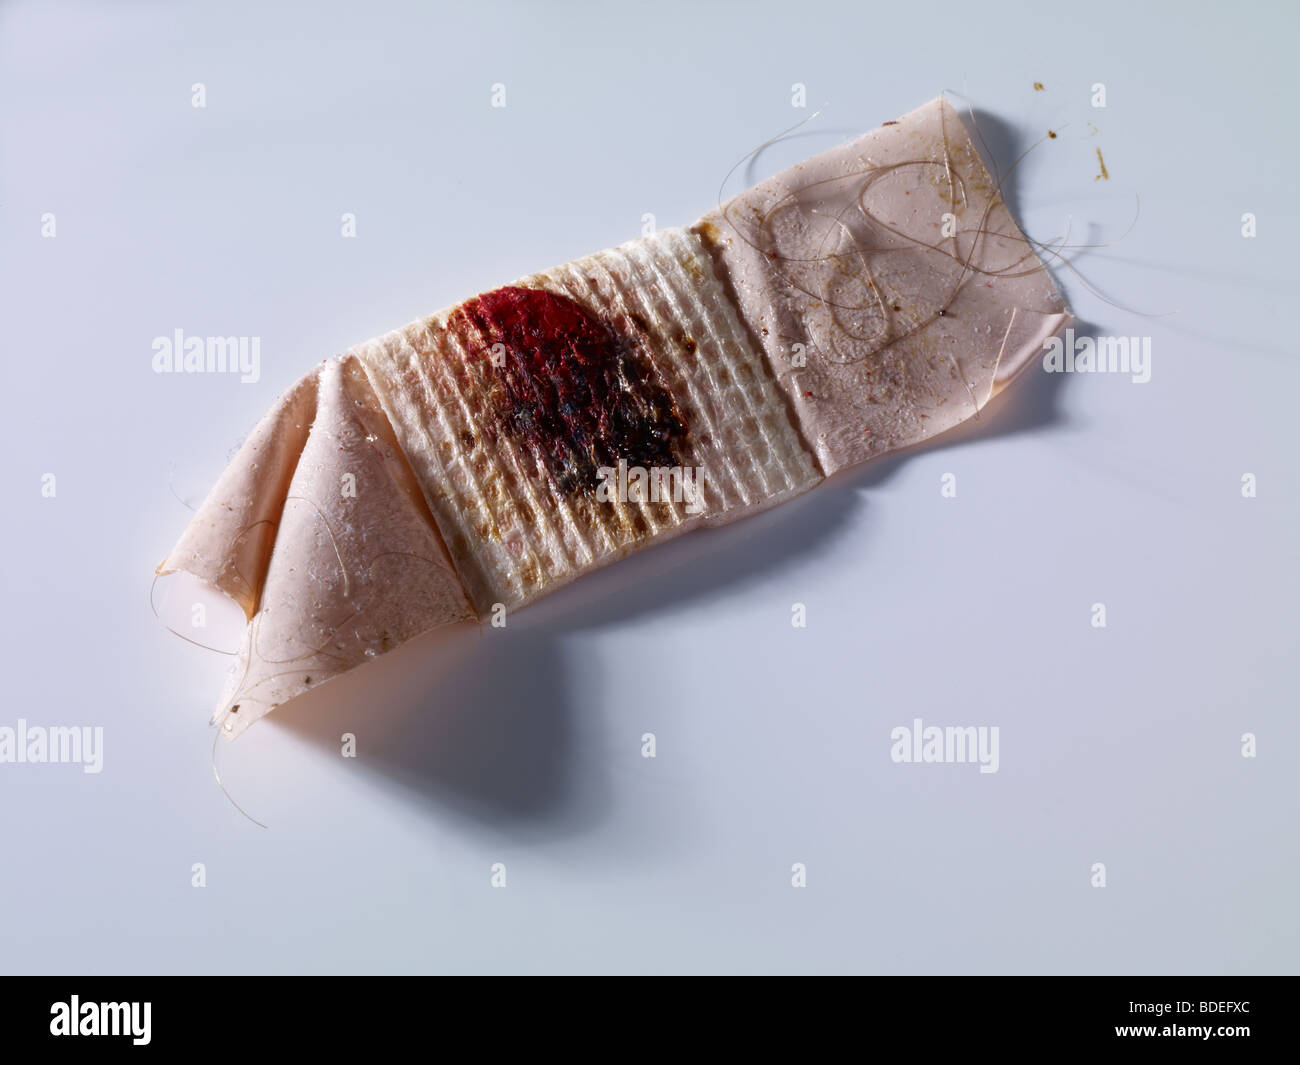 Old bloodied sticking plaster or adhesive bandage Stock Photo